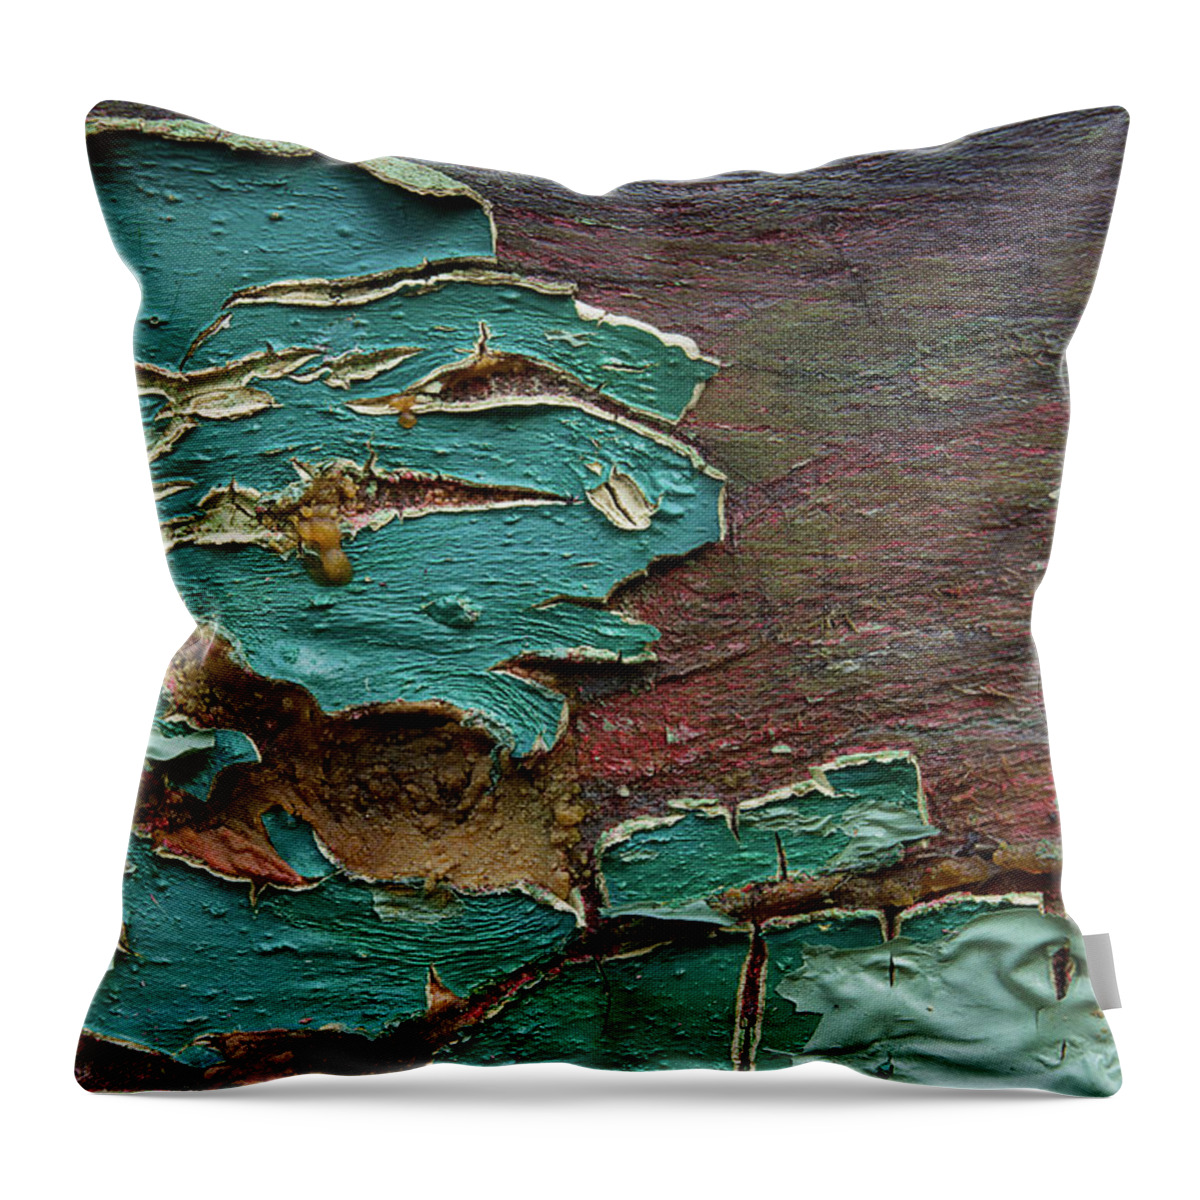 Paint Throw Pillow featuring the photograph Peeling by Mike Eingle